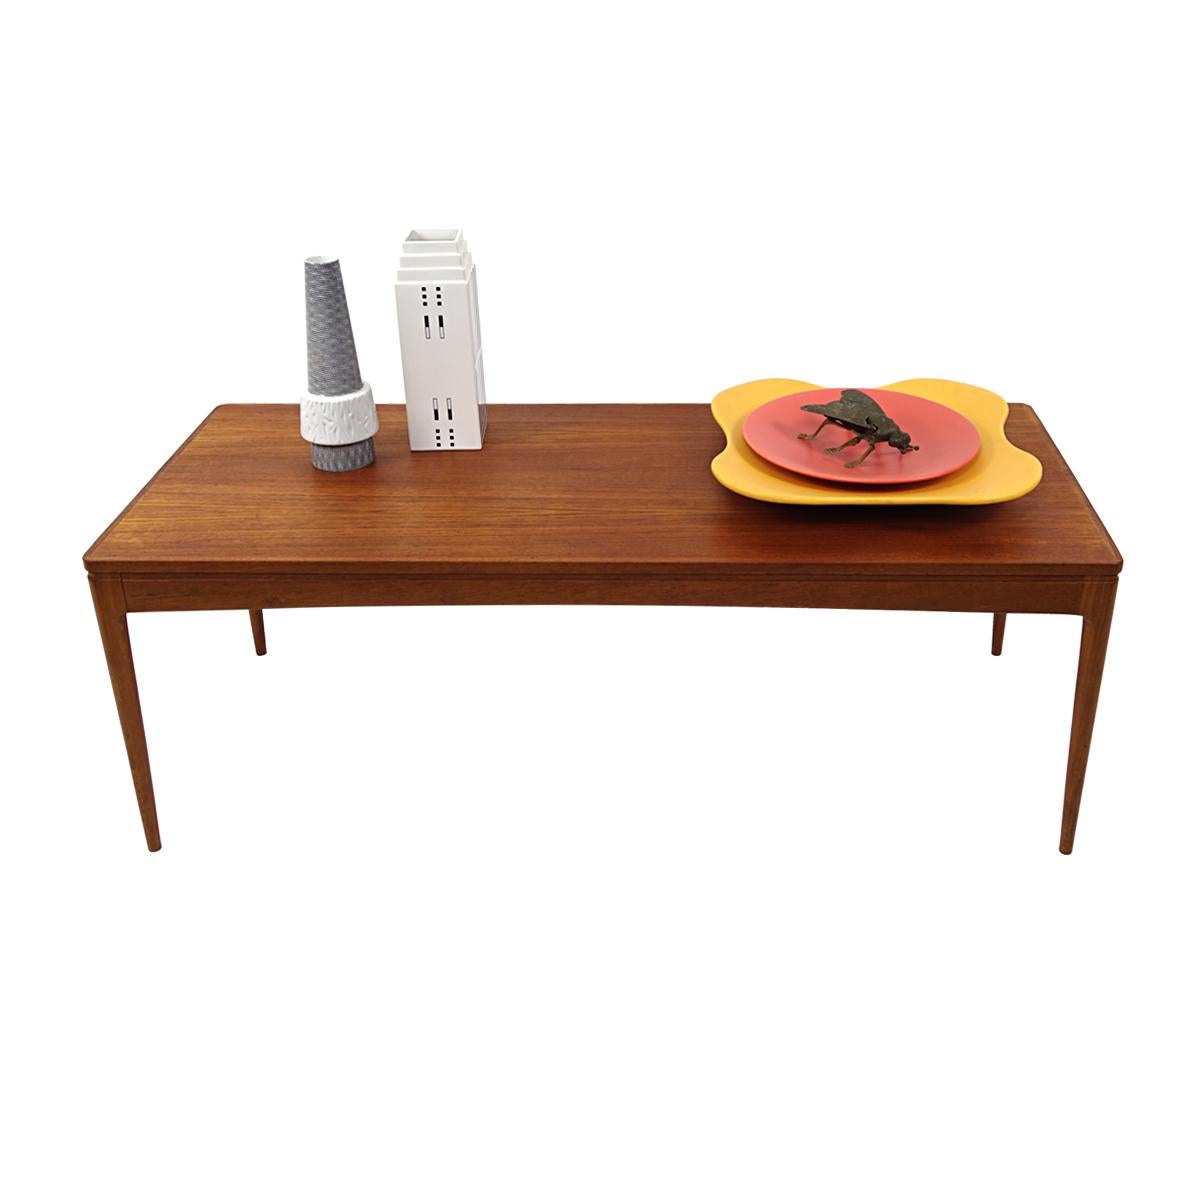 This elegant teak wood coffee table radiates homeliness in its simplicity. The rounded edges of the table top can also be found in the rounded shape of the top at the pint where the legs start. This gives the table a soft tone and together with the